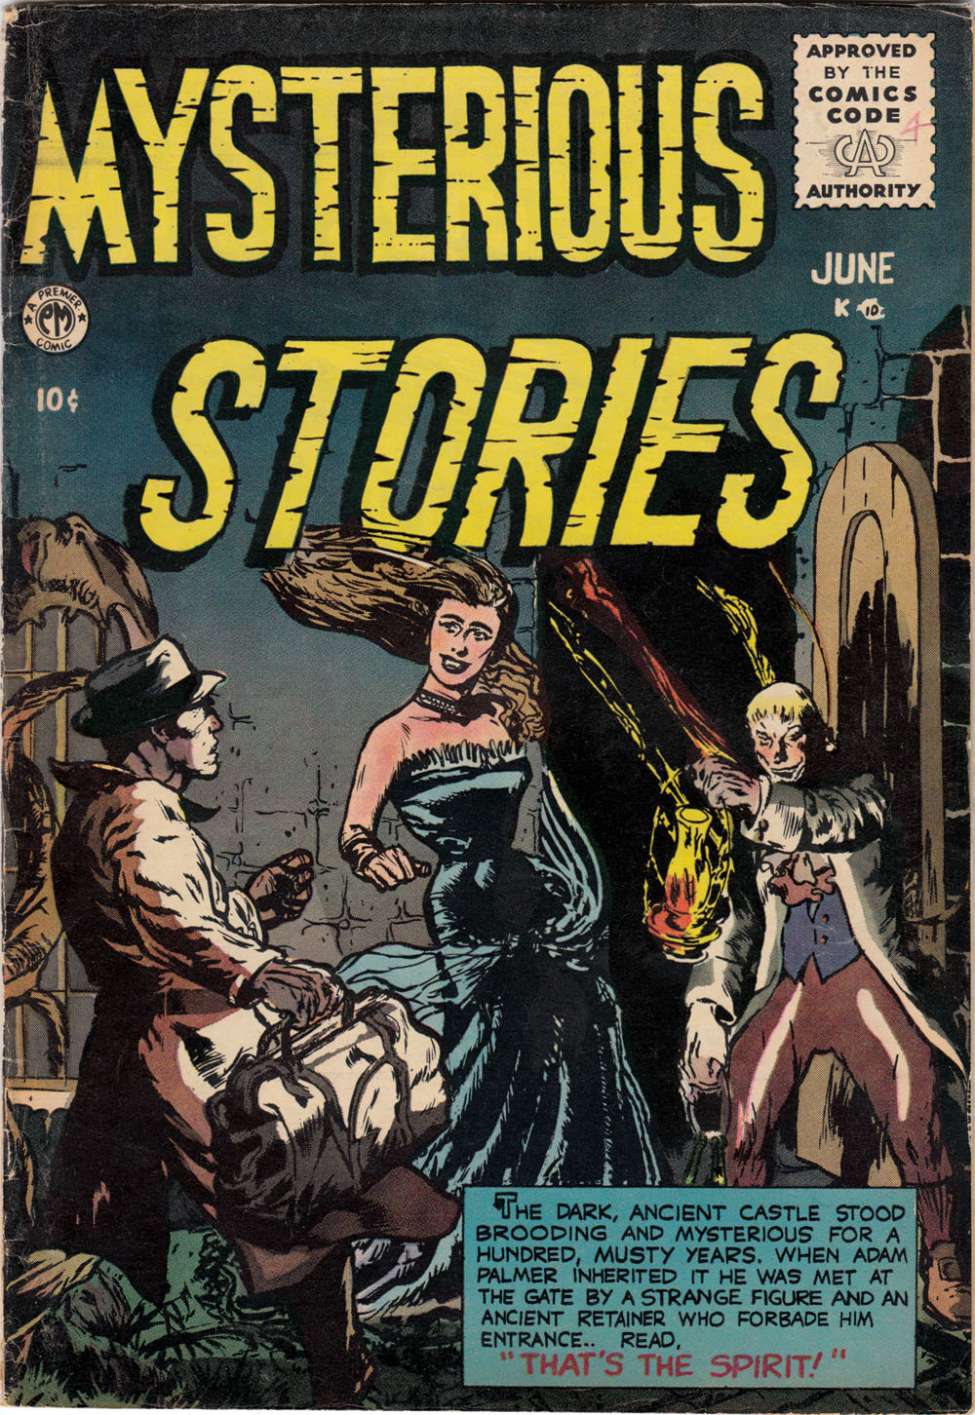 Book Cover For Mysterious Stories 4